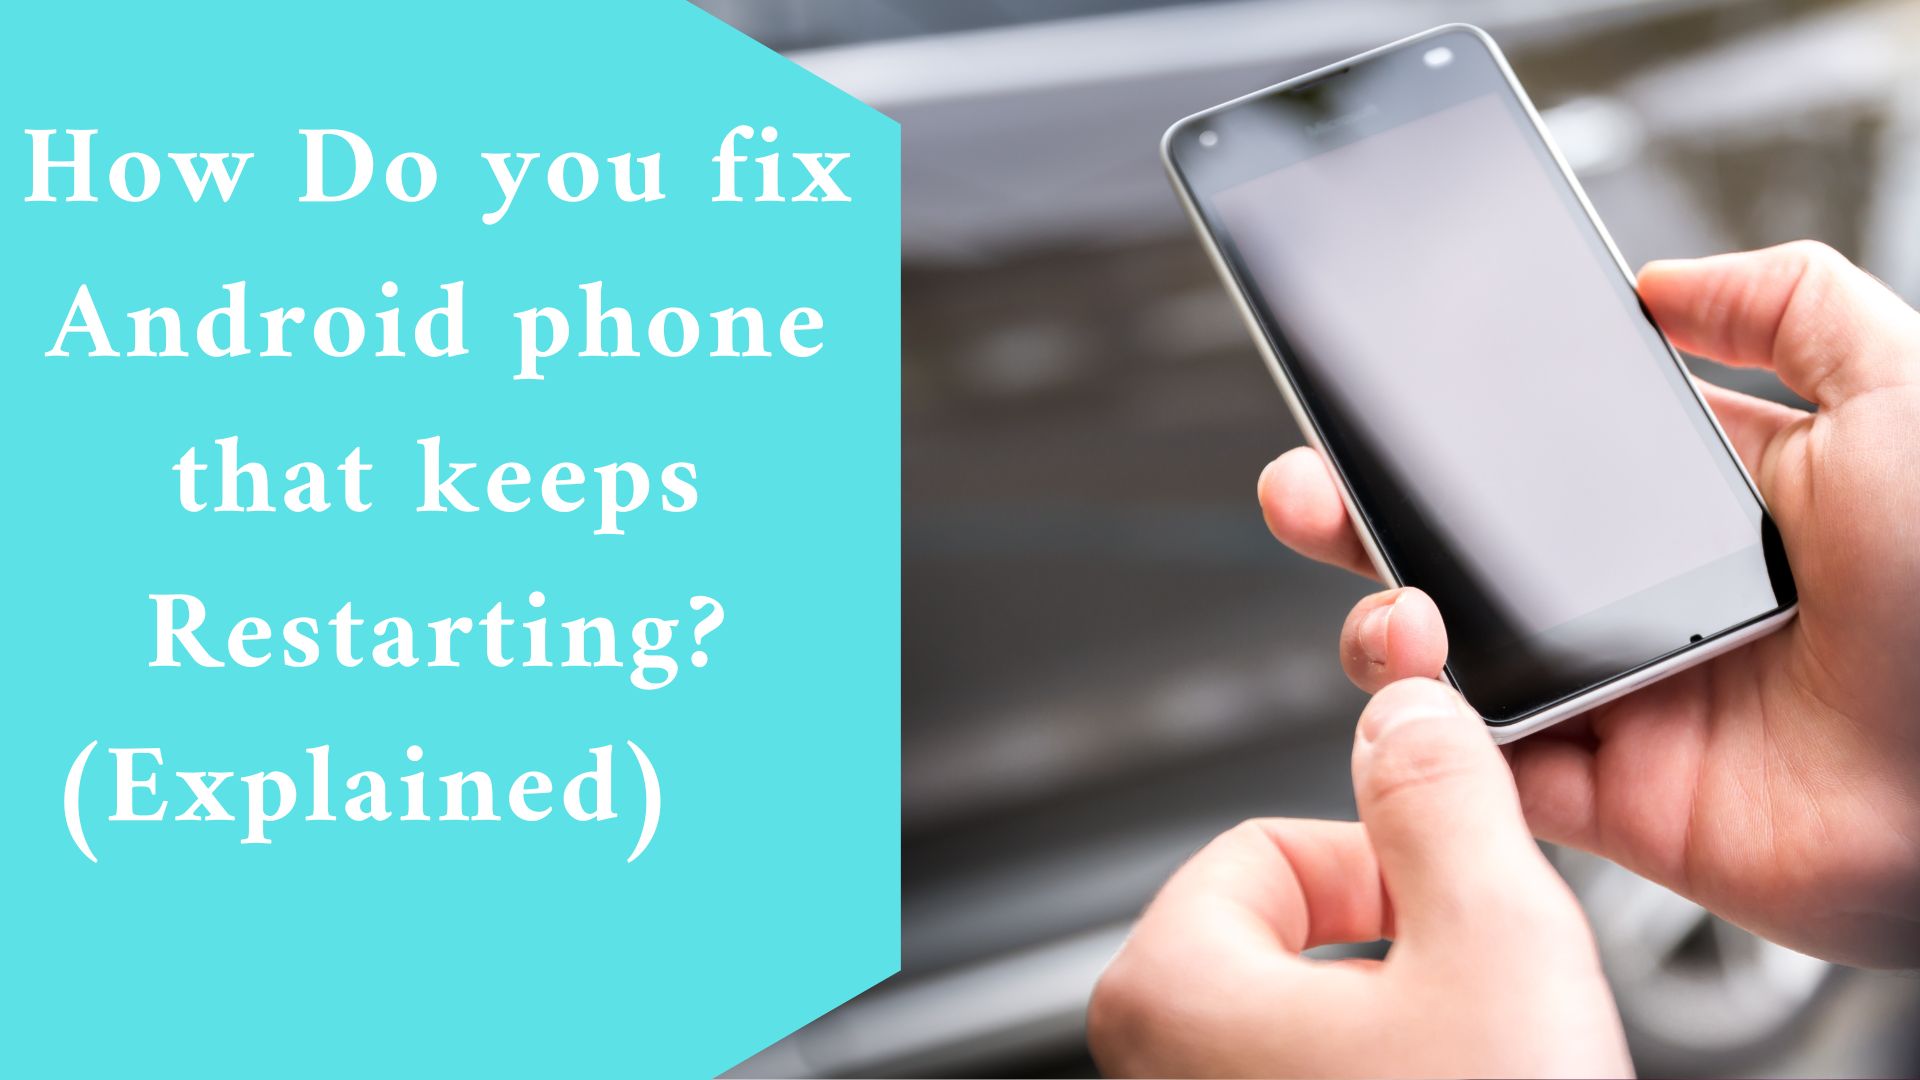 How Do you fix Android phone that keeps Restarting? (Explained)